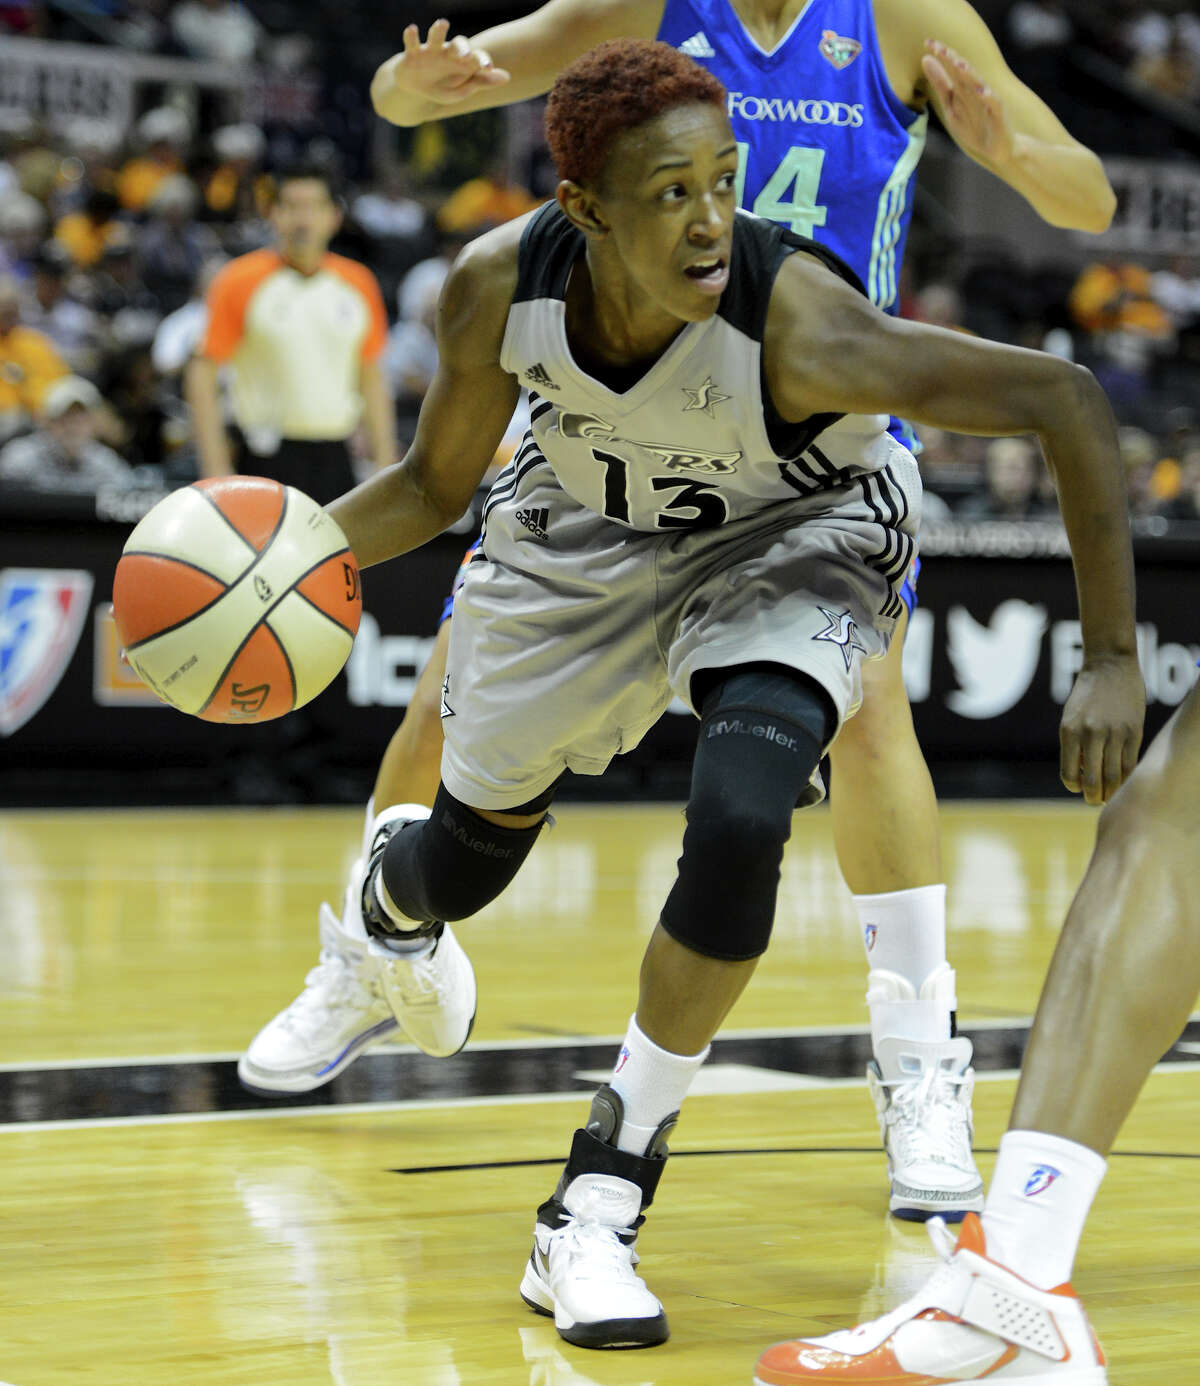 The Silver Stars' Daniell Robinson (13) looks to make a pass from under the buck during a WNBA game between the San Antonio Silver Stars and the New York Liberty on Tuesday, Sept. 18, 2012, at the AT&T Center.